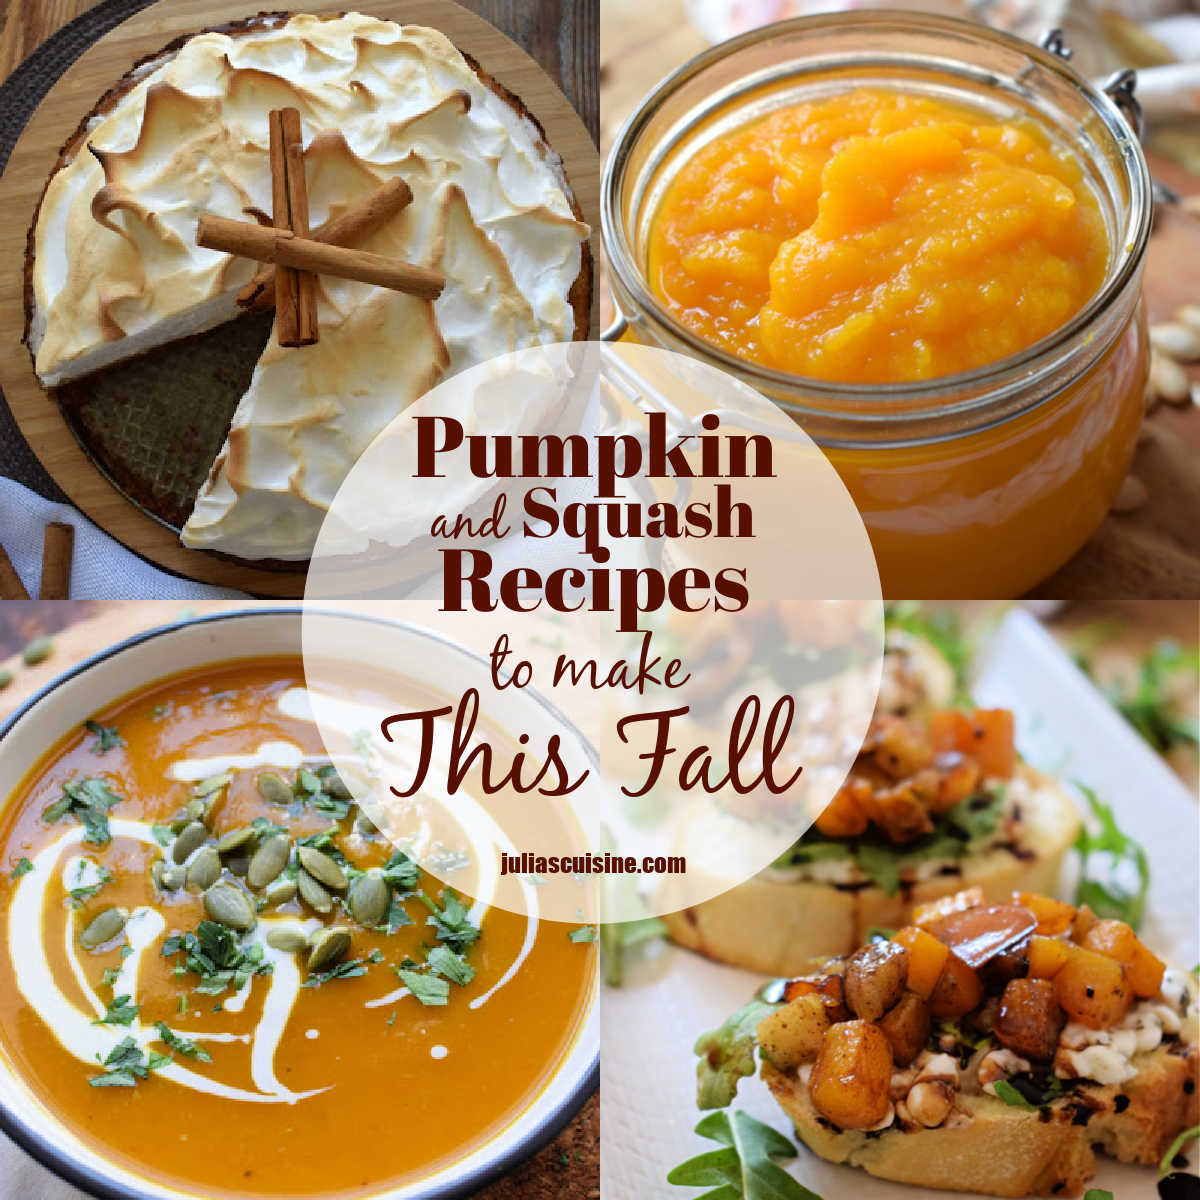 Collage of Pumpkin and squash recipes.